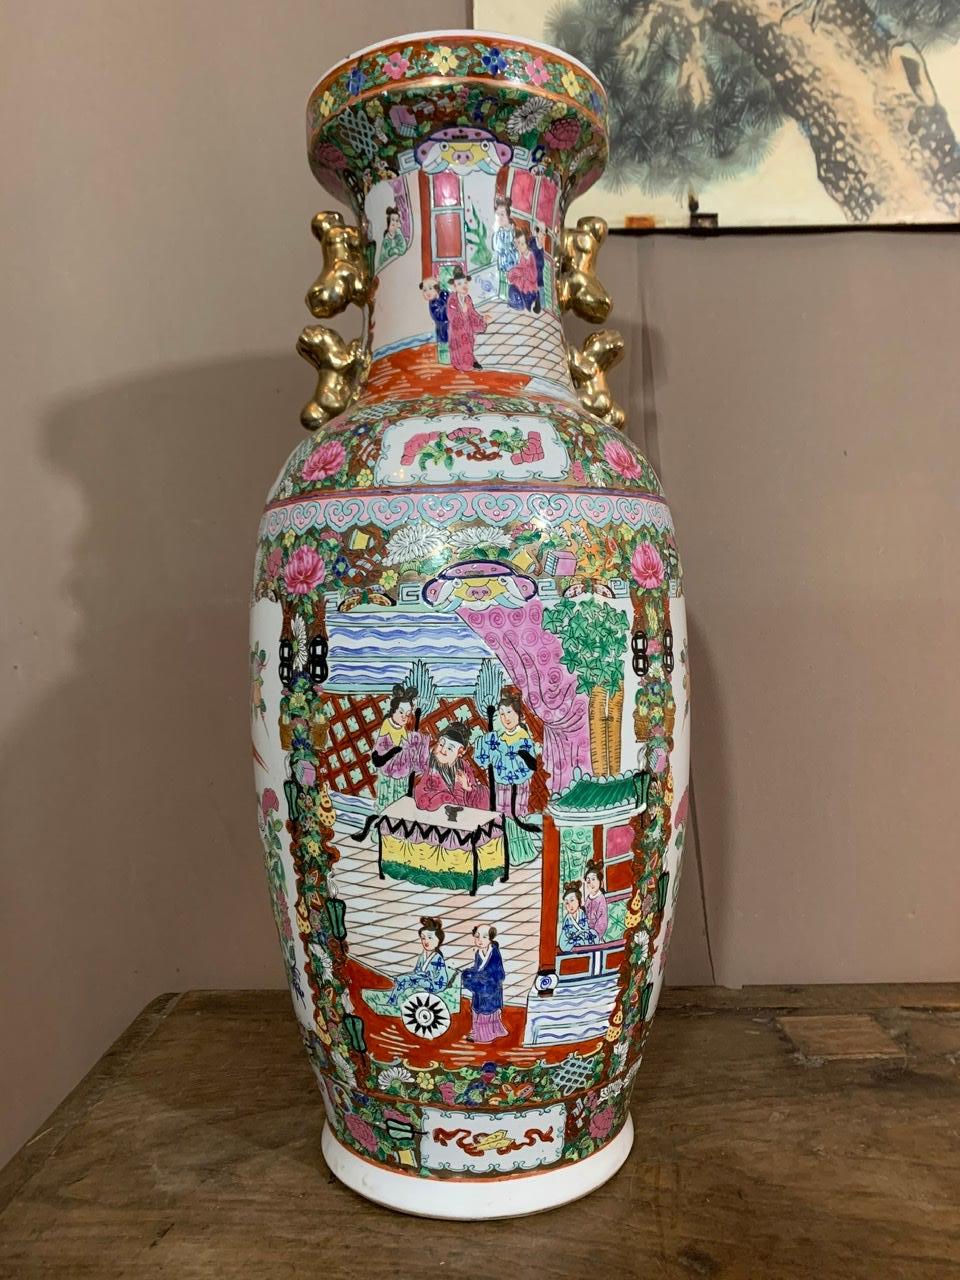 Beautiful Canton porcelain baluster vase with floral decoration and representation of court scenes in the reserves. It shows men and women in traditional Chinese dress. This vase has double handles on both sides, in the shape of golden 